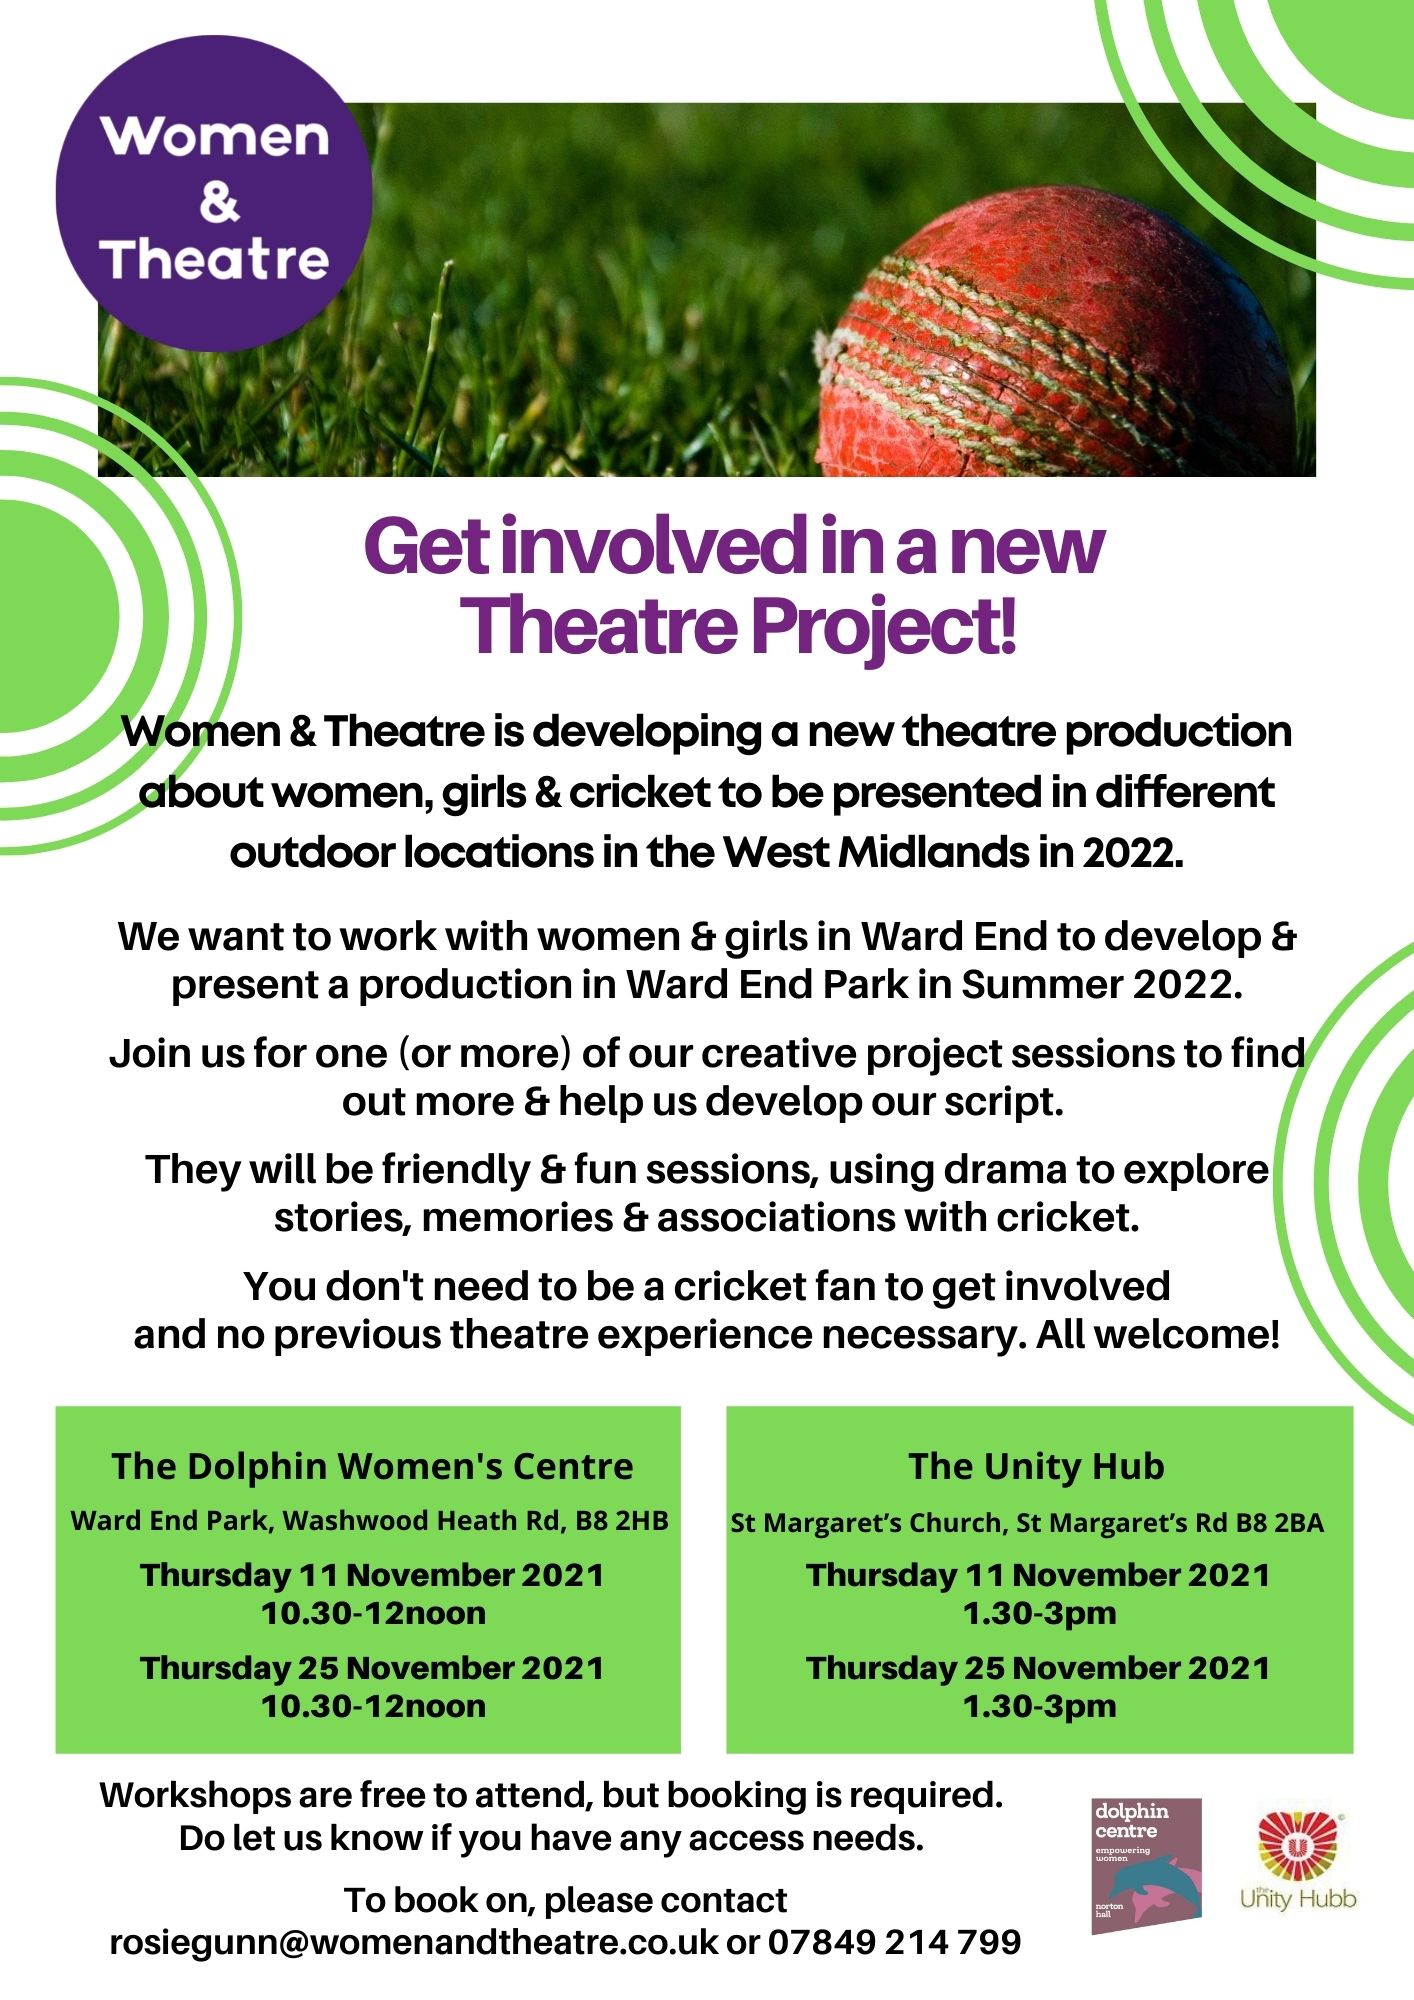 Community Theatre Production - creative sessions in November